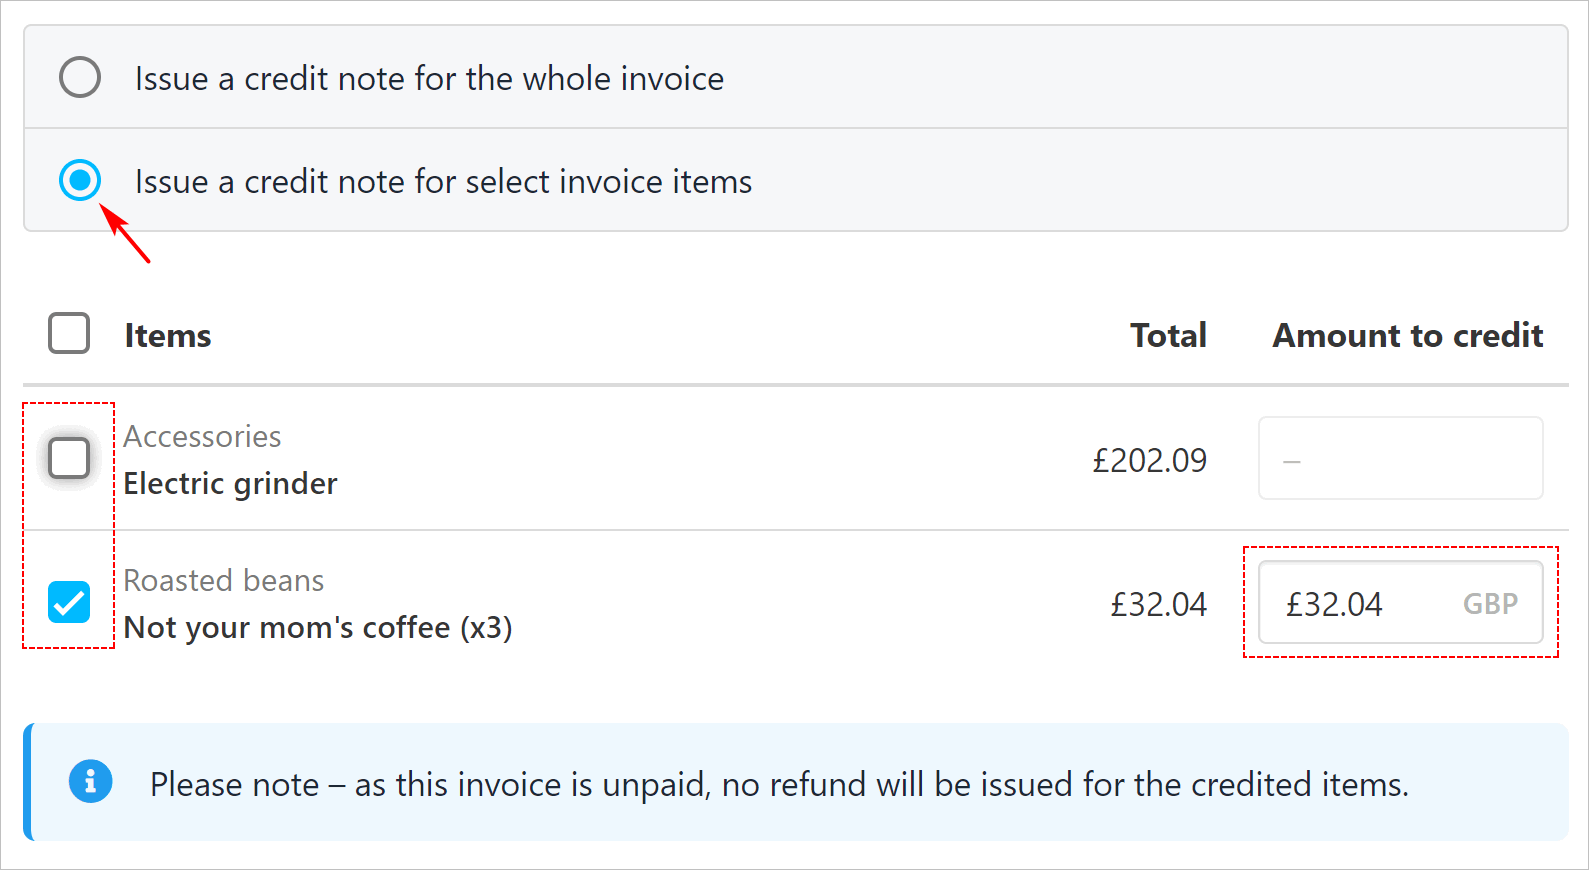 Select invoice items